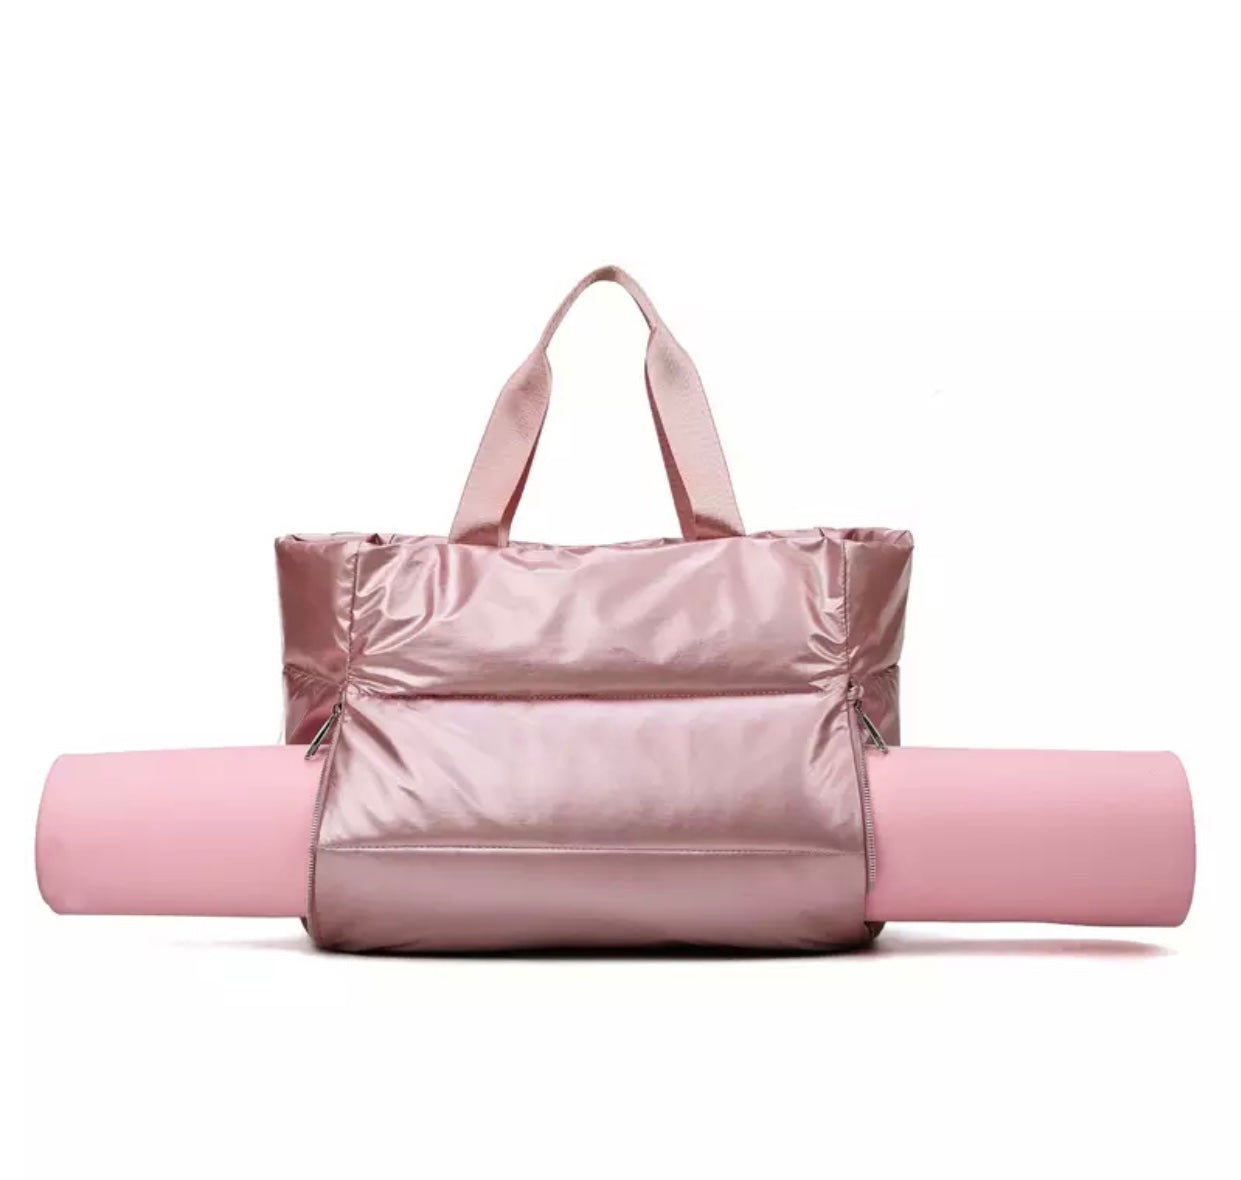 Sports bag, dance bag from The Collective Dancewear